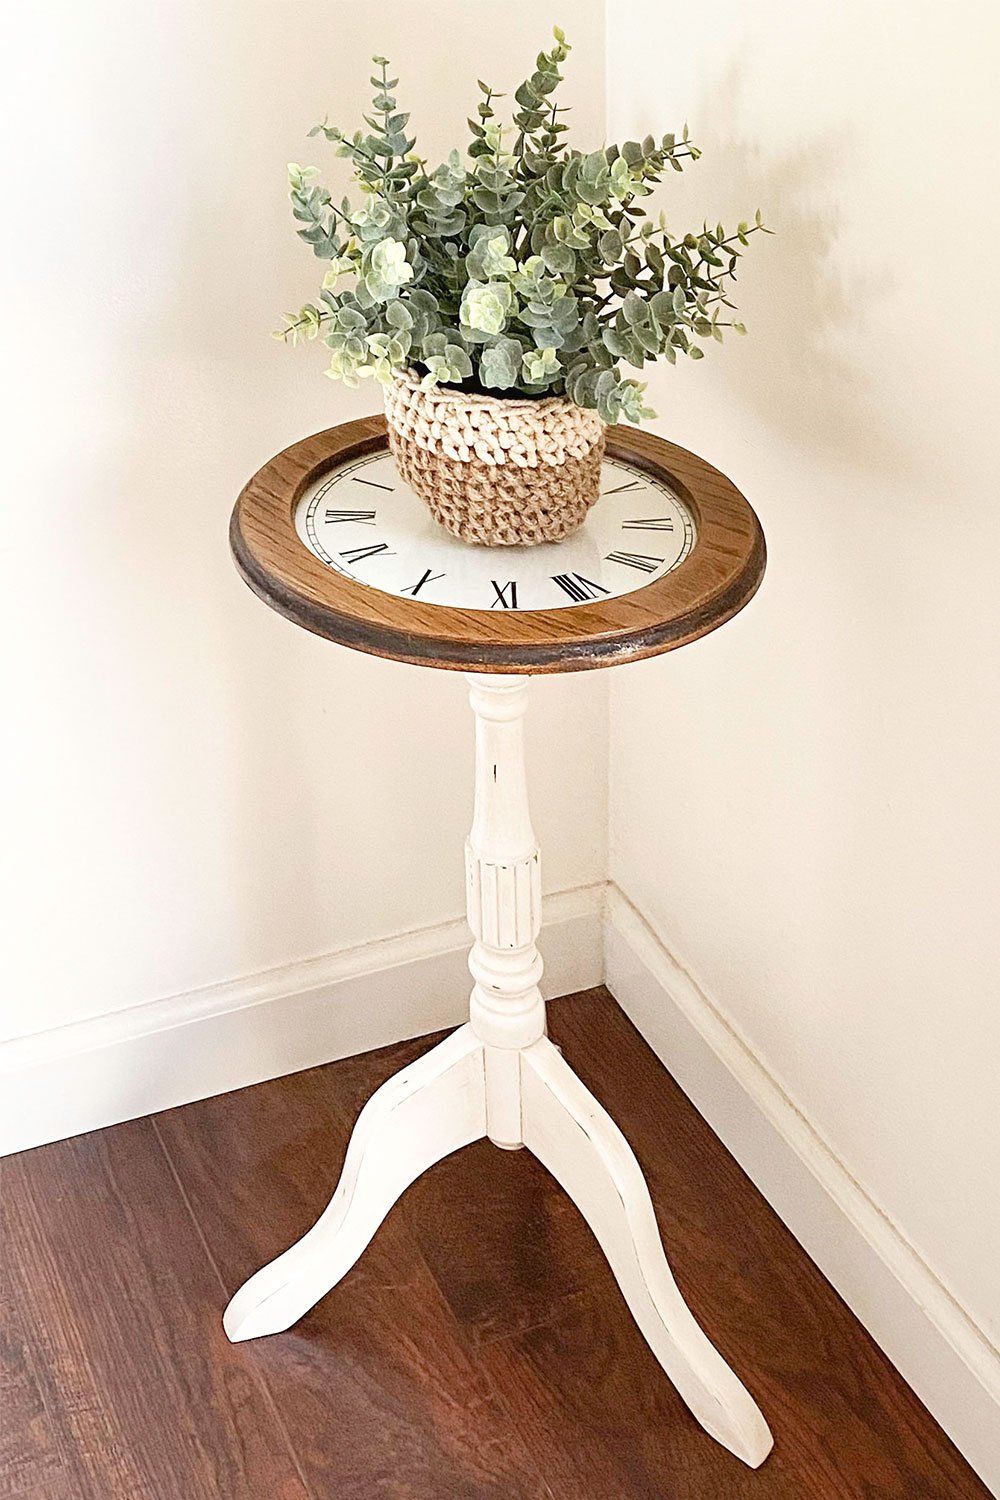 Refinished Wood Plant Stand With A Diy Vinyl Clock Tabletop – In Painted Wood Plant Stands (View 2 of 15)